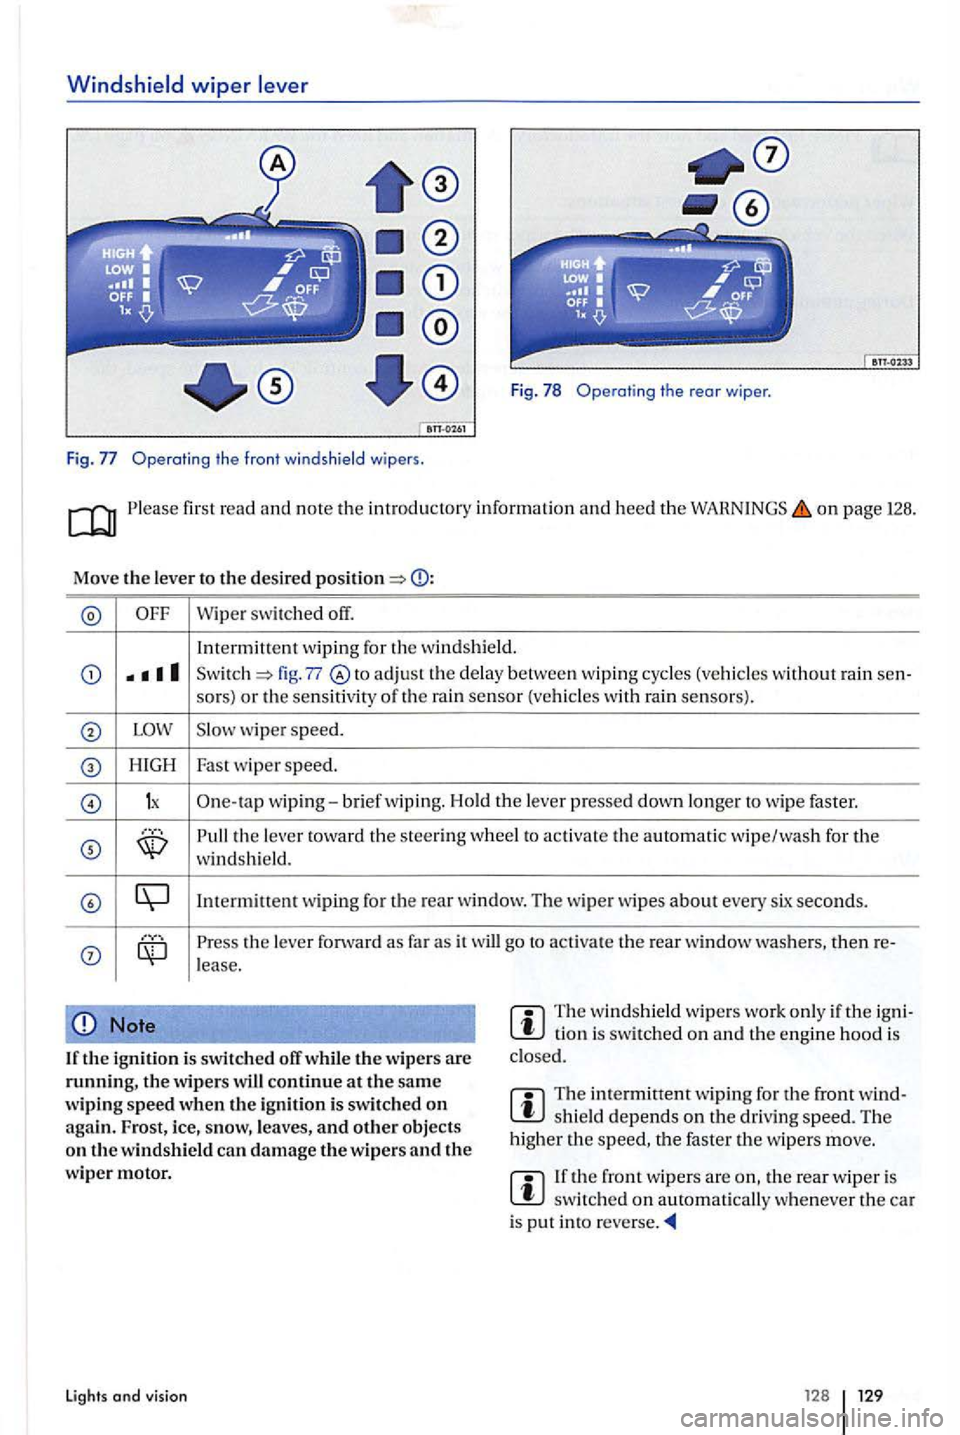 VOLKSWAGEN GOLF PLUS 2004 User Guide Windshield wiper lever 
Fig . 78 Operating  the rear wiper . 
Fig. Operatin g  t he  front  windsh ie ld  wipers . 
on page 128. 
Move the leve r to t he  des ired 
Wipe r switched  off. 
In term itt
